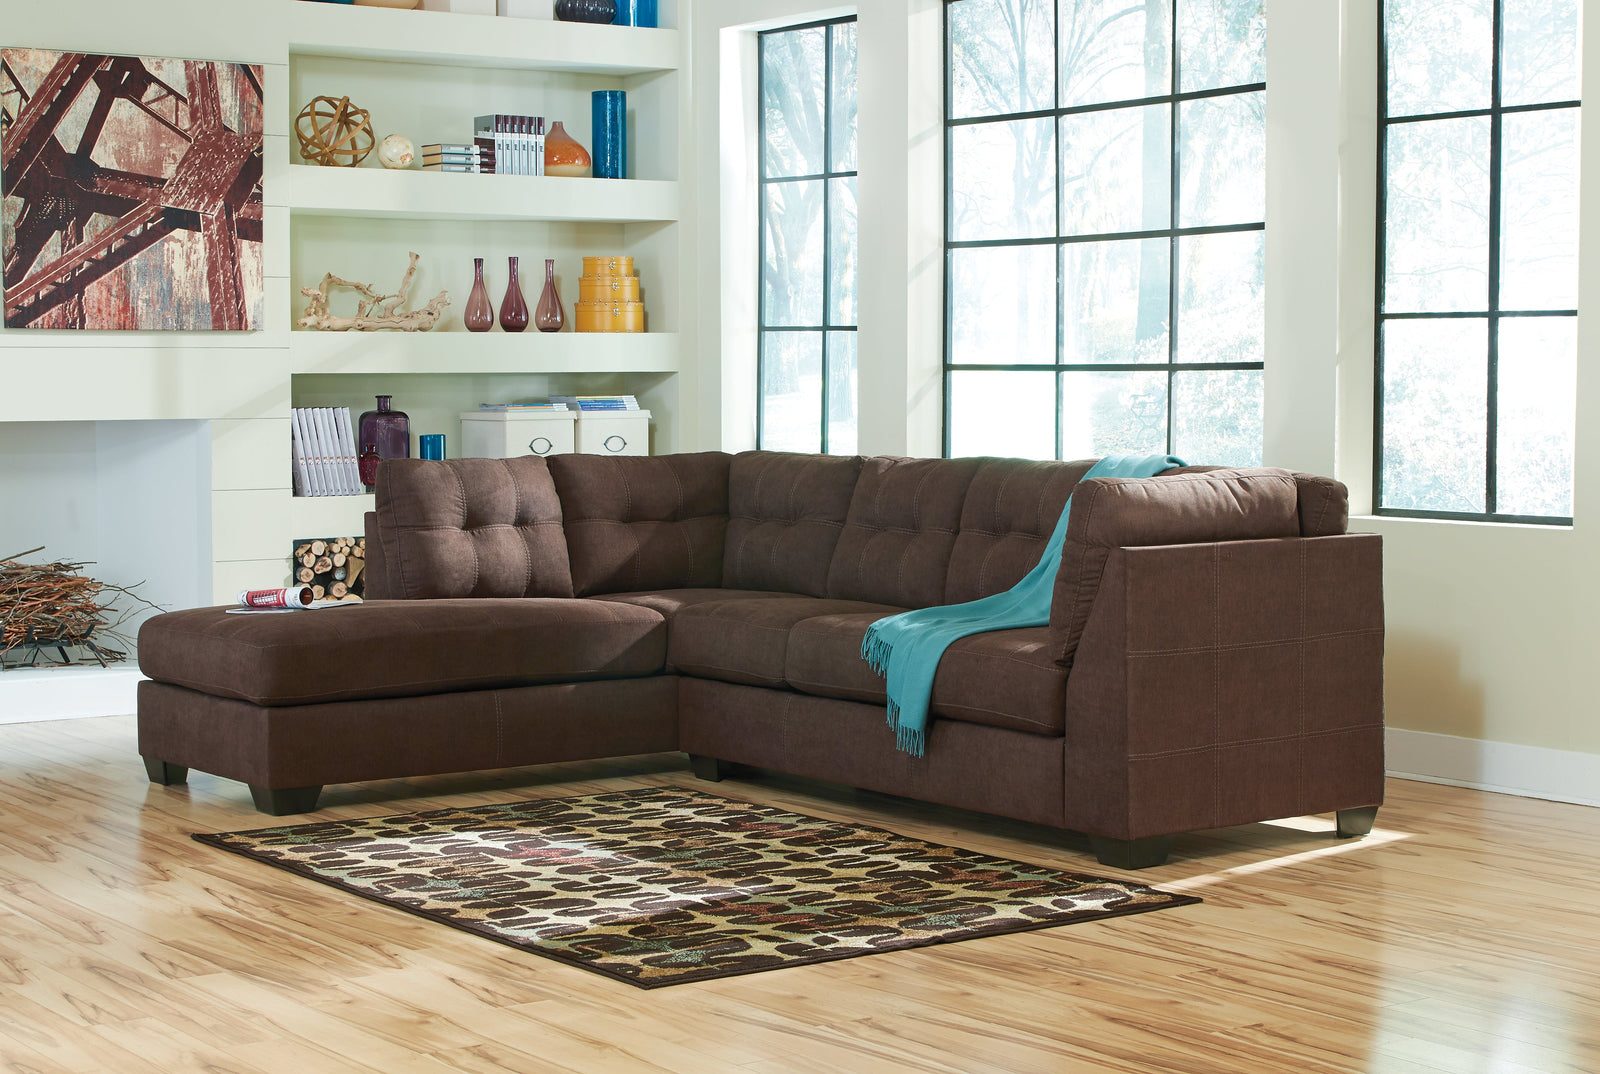 Maier Walnut 2-Piece Sectional With Chaise 45221S1